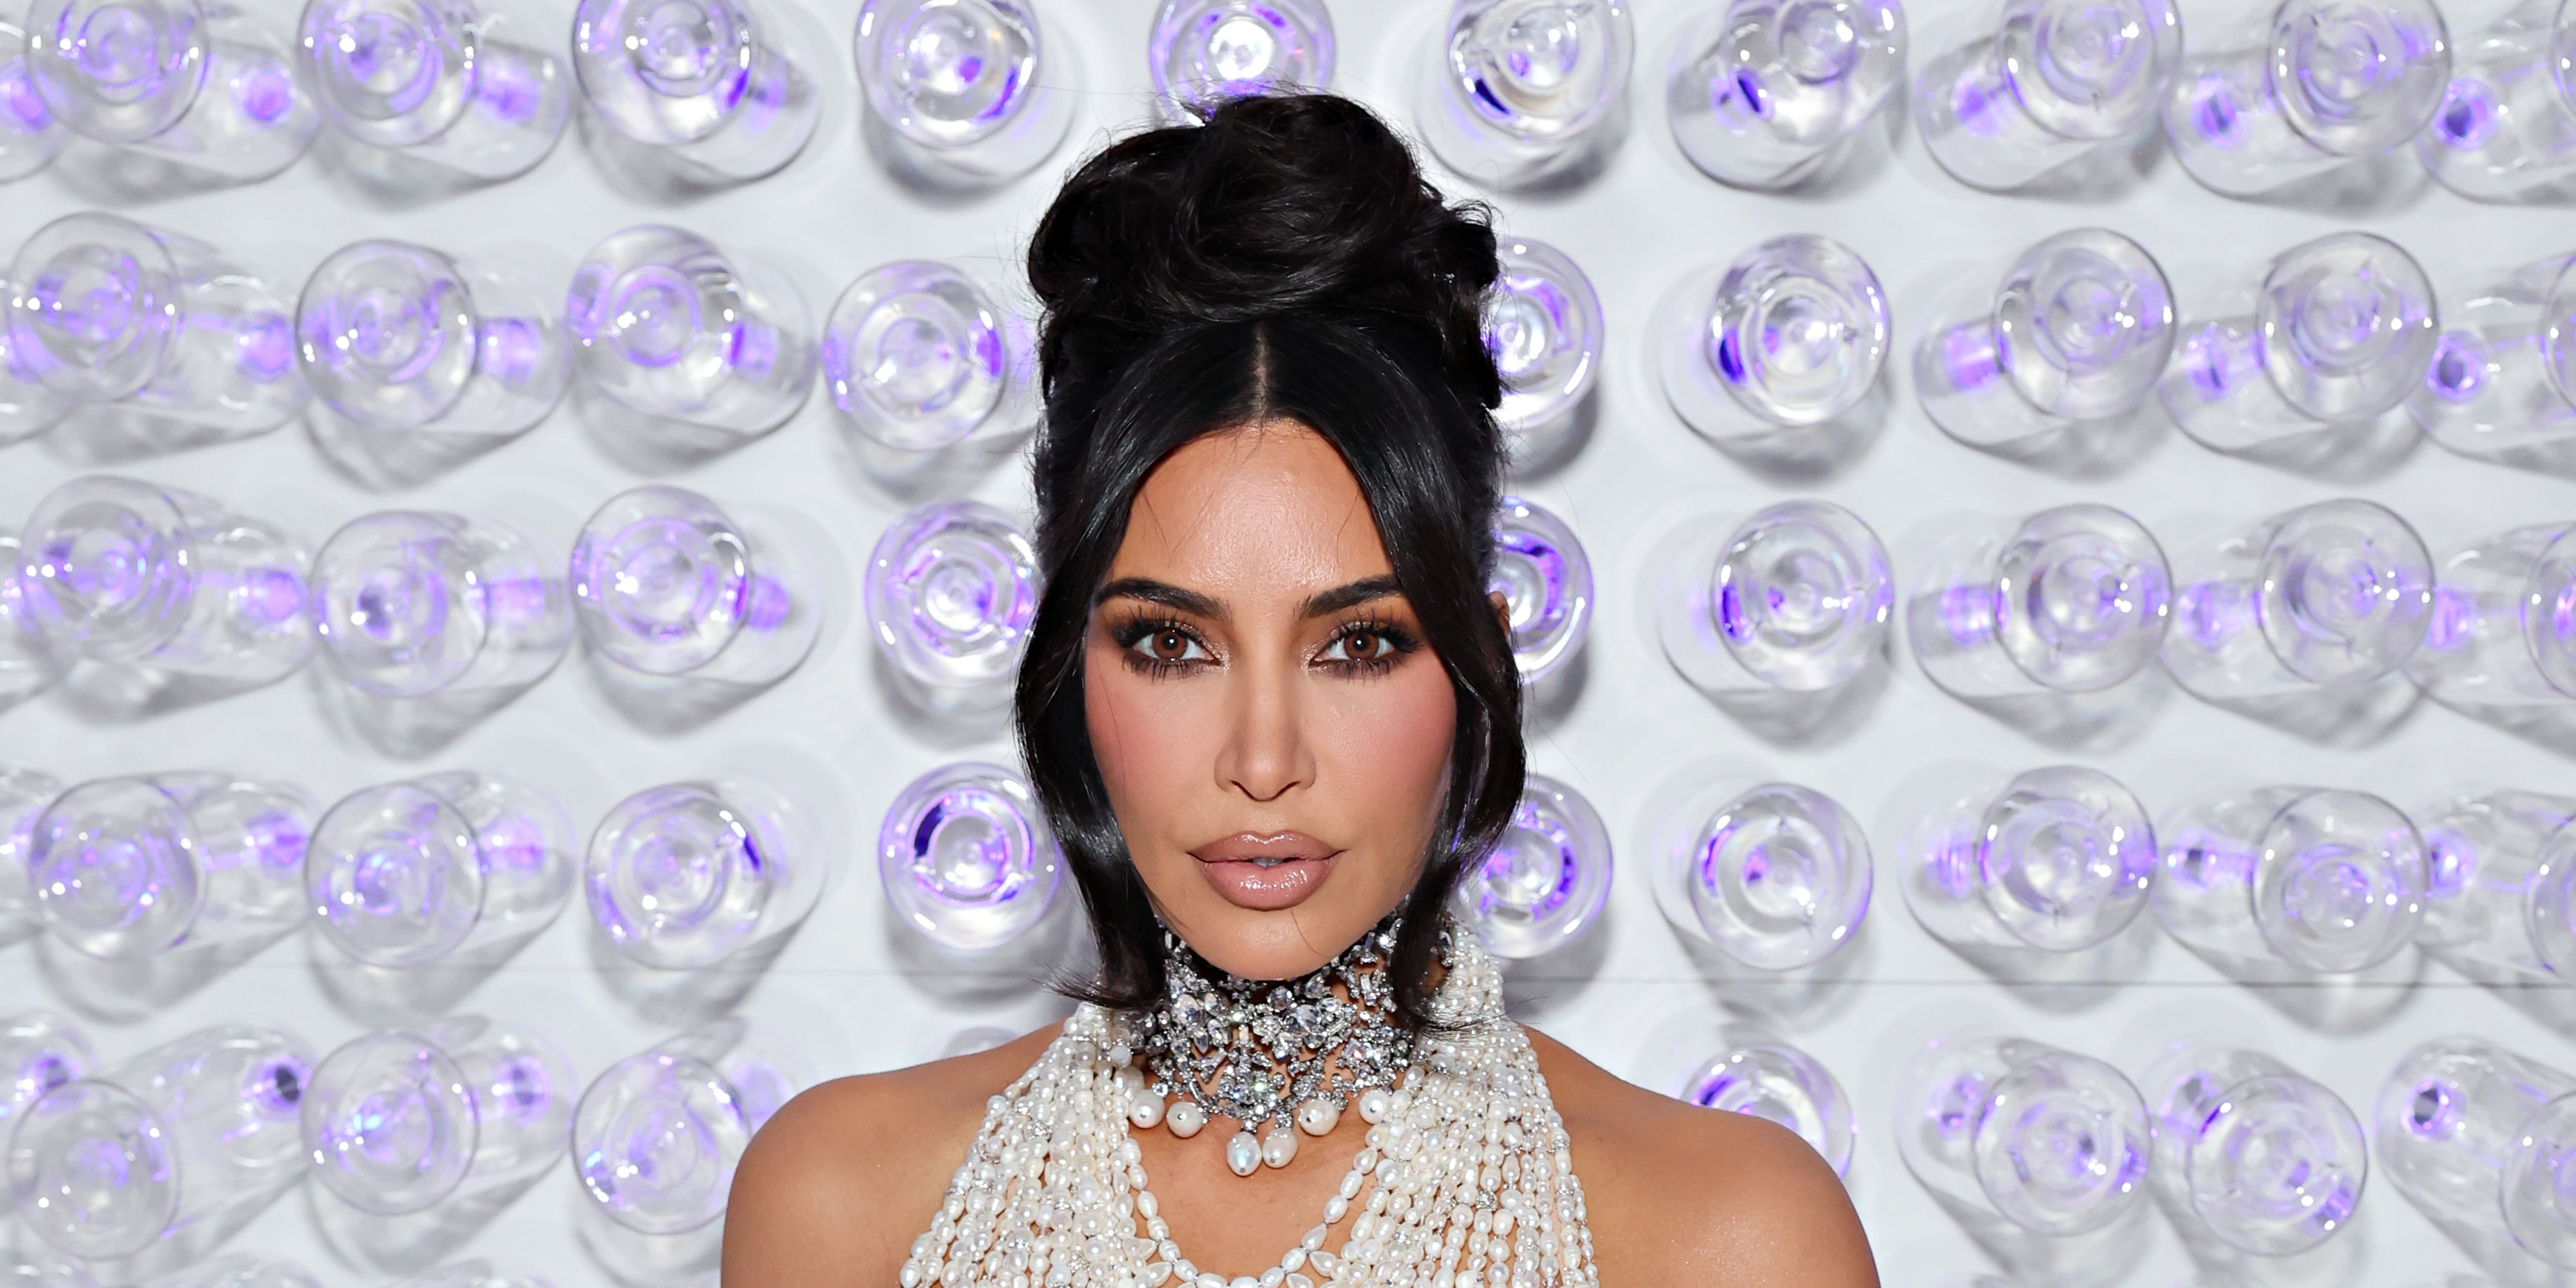 Kim Kardashian - Available for the first time since launch: I'm